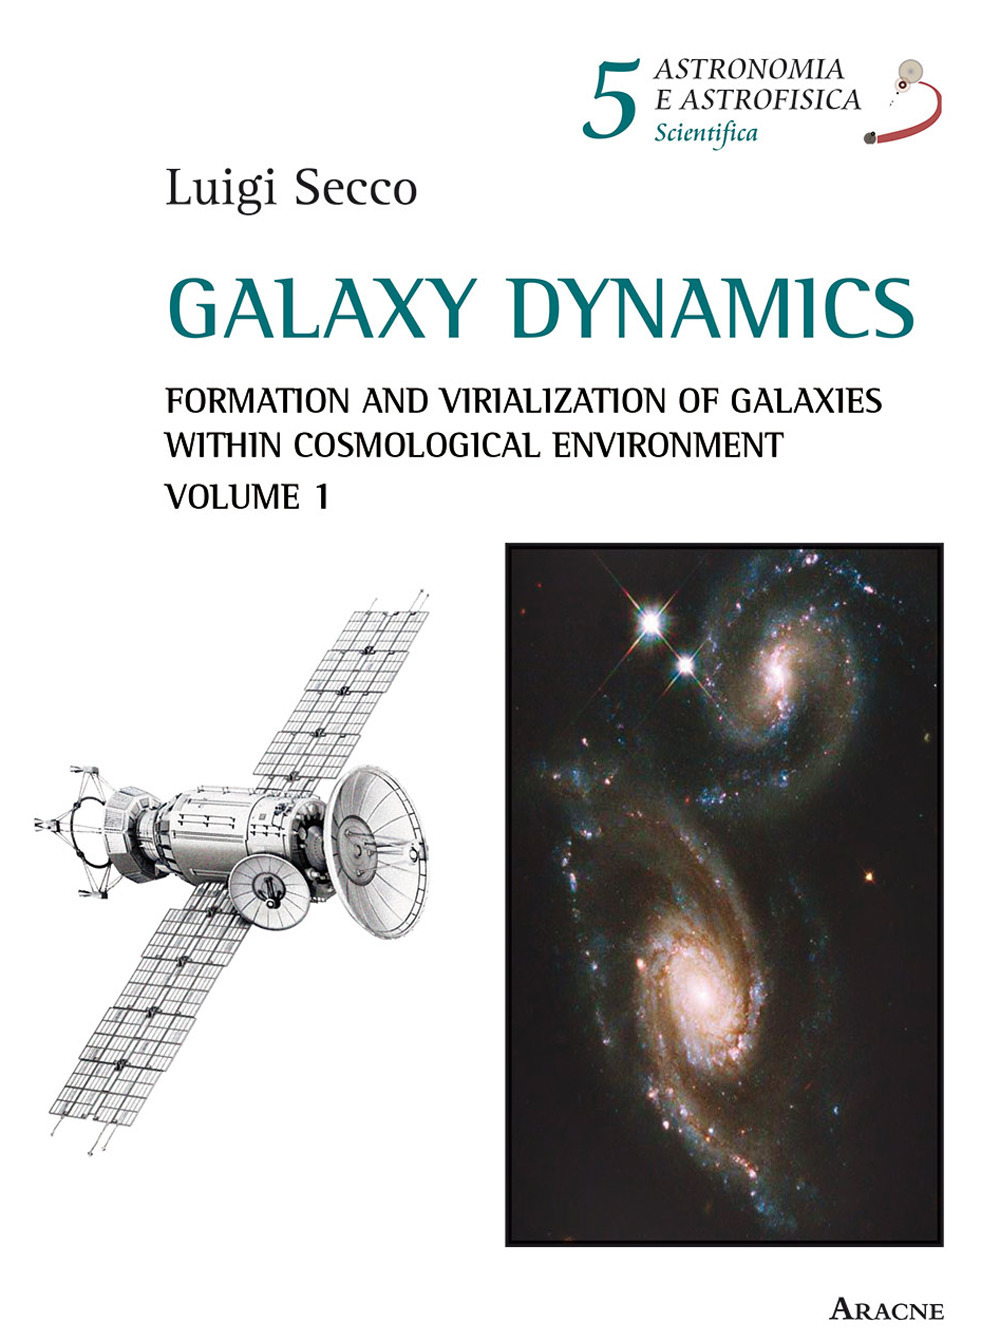 Galaxy dynamics. Vol. 1: Formation and virialization of galaxies within cosmological environment